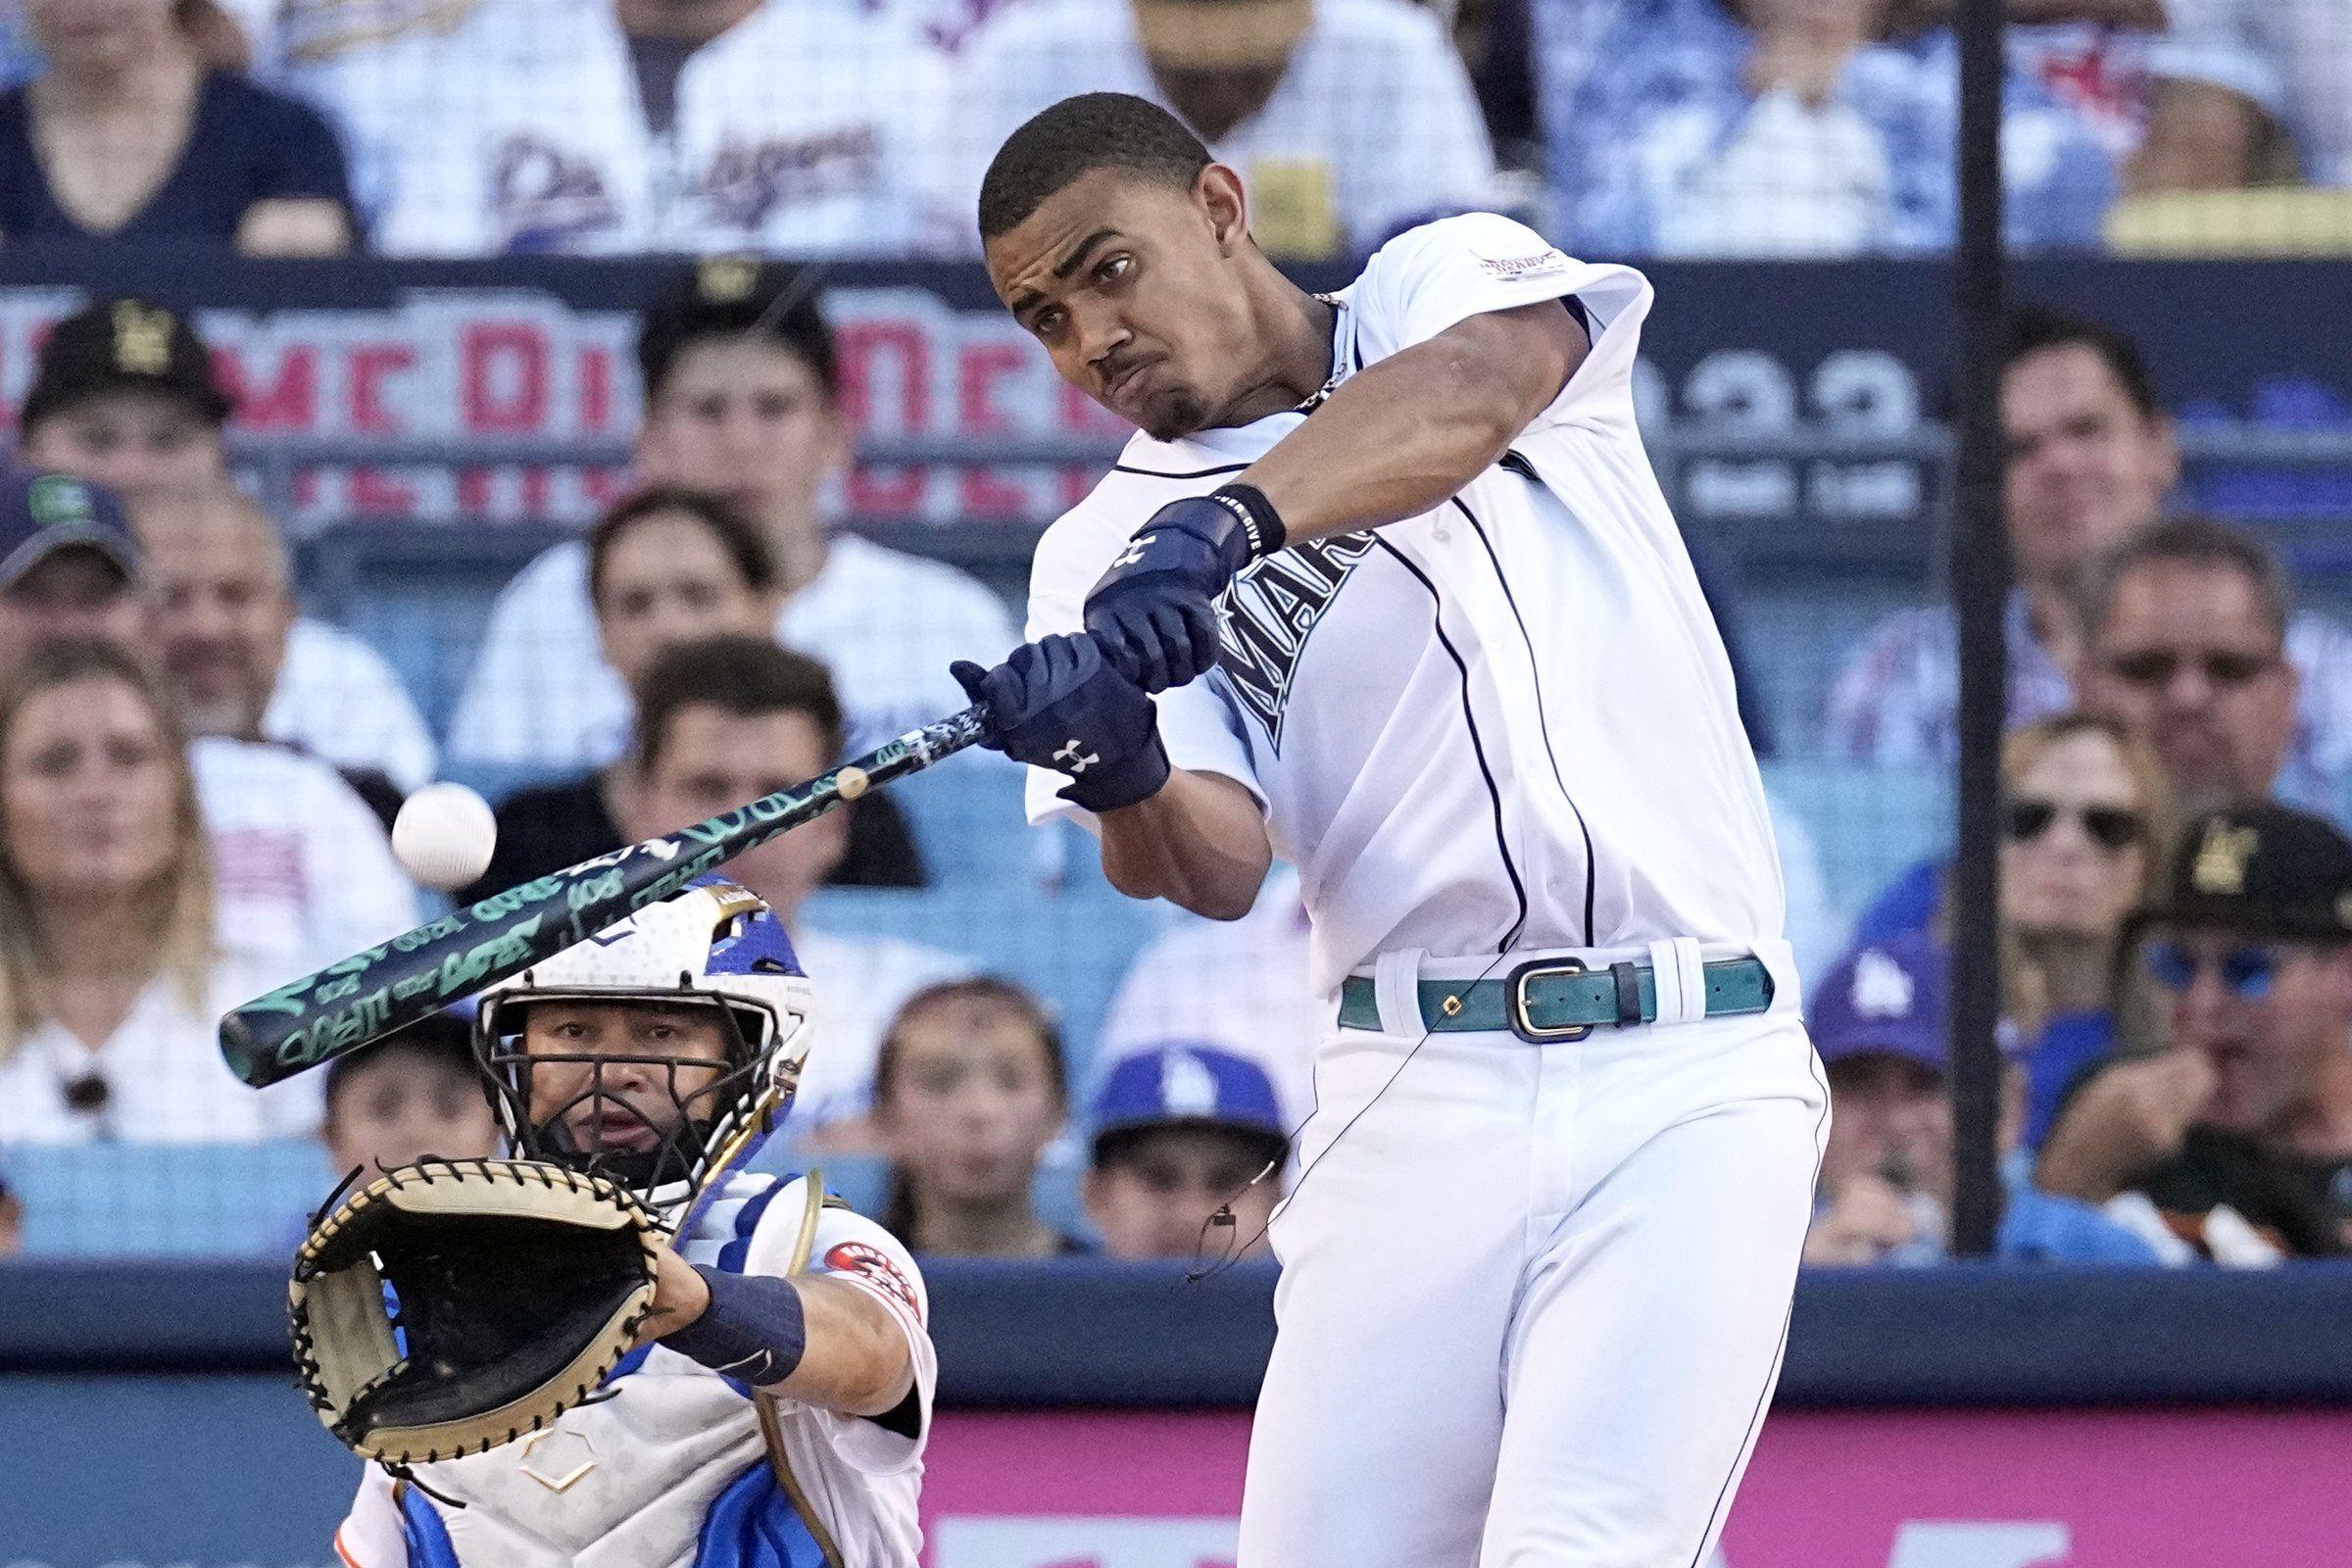 Julio Rodriguez dazzles in Home Run Derby debut, reaching final The Seattle Times